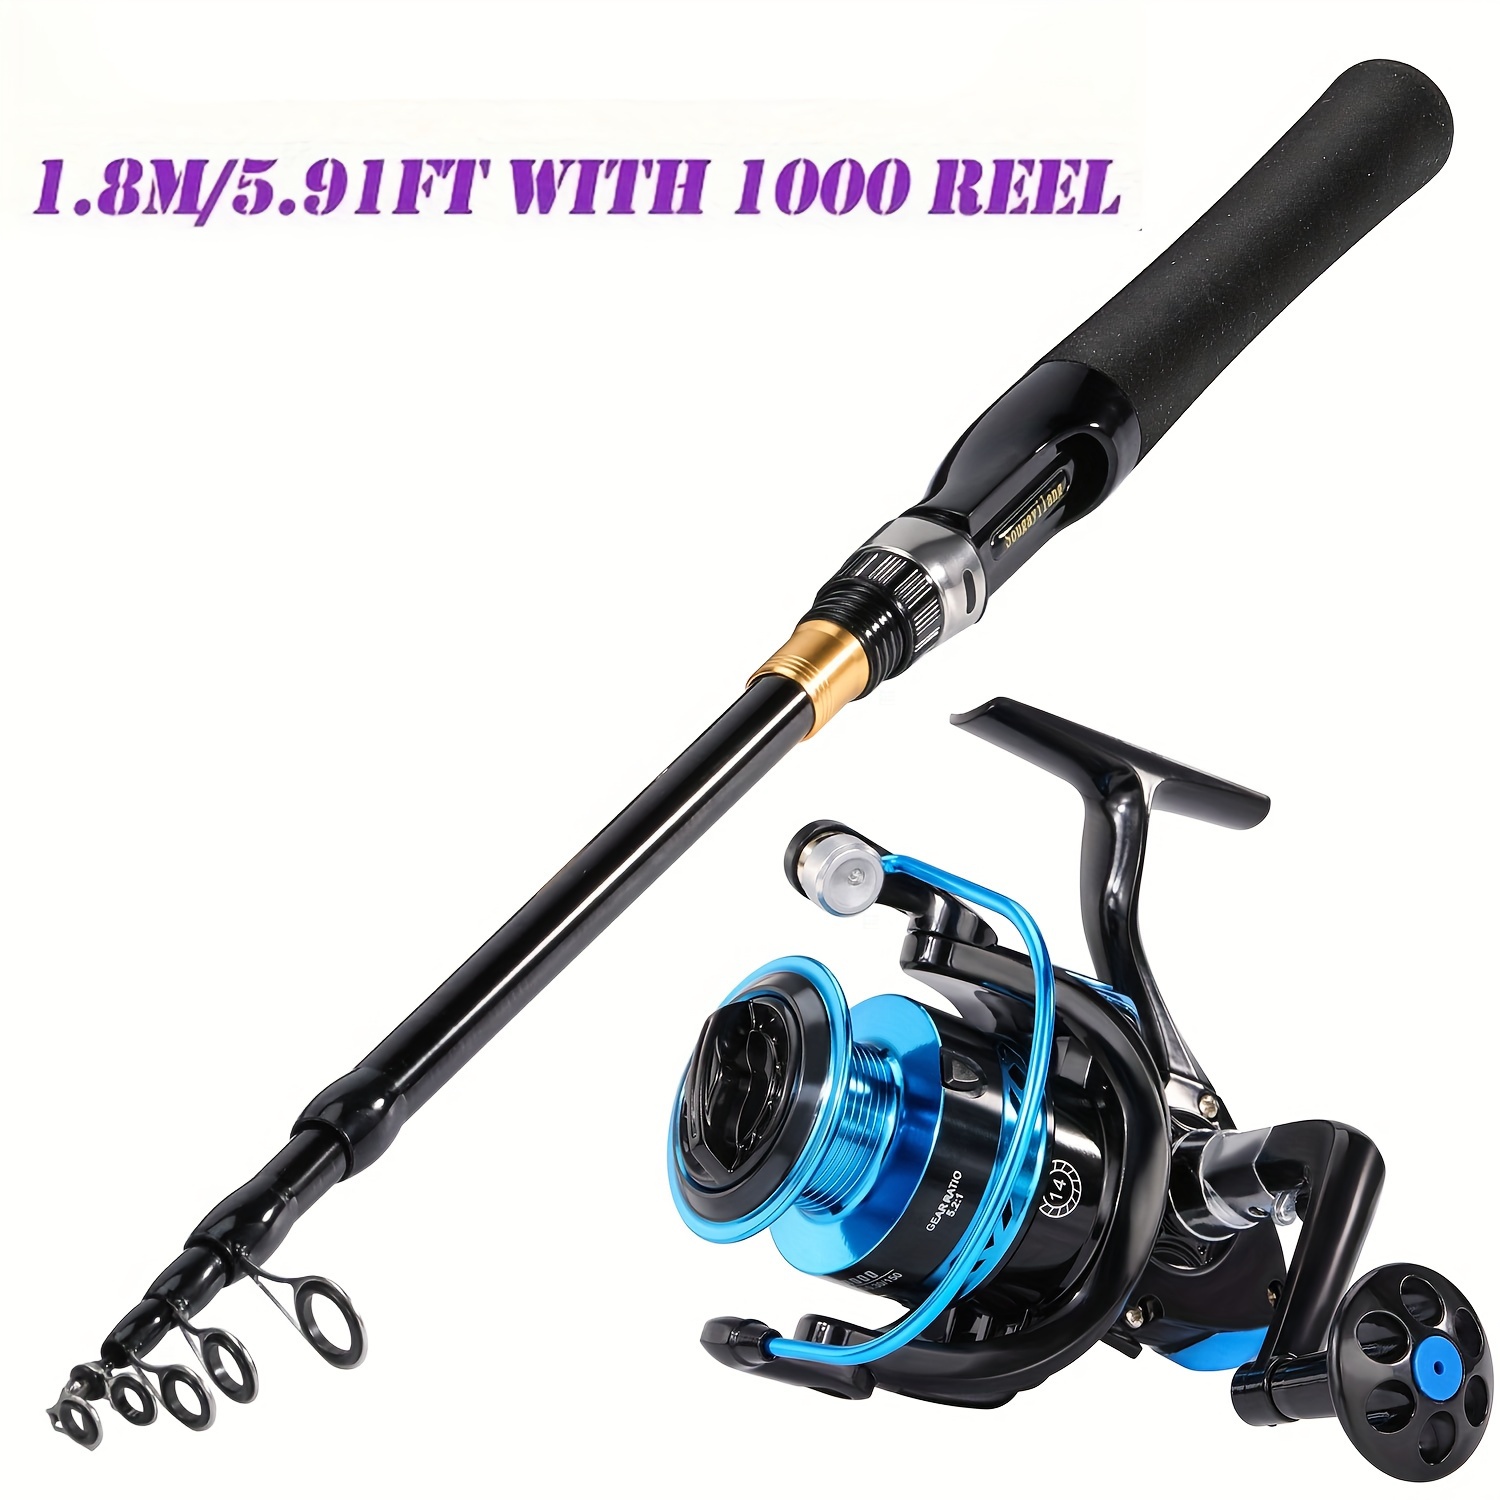  Sougayilang Telescopic Fishing Rod Reel Combos with Carbon  Fiber Fishing Pole Spinning Reels and Fishing Accessories for Travel Ocean  Saltwater Freshwater Fishing(1.8M/5.91FT) : Sports & Outdoors